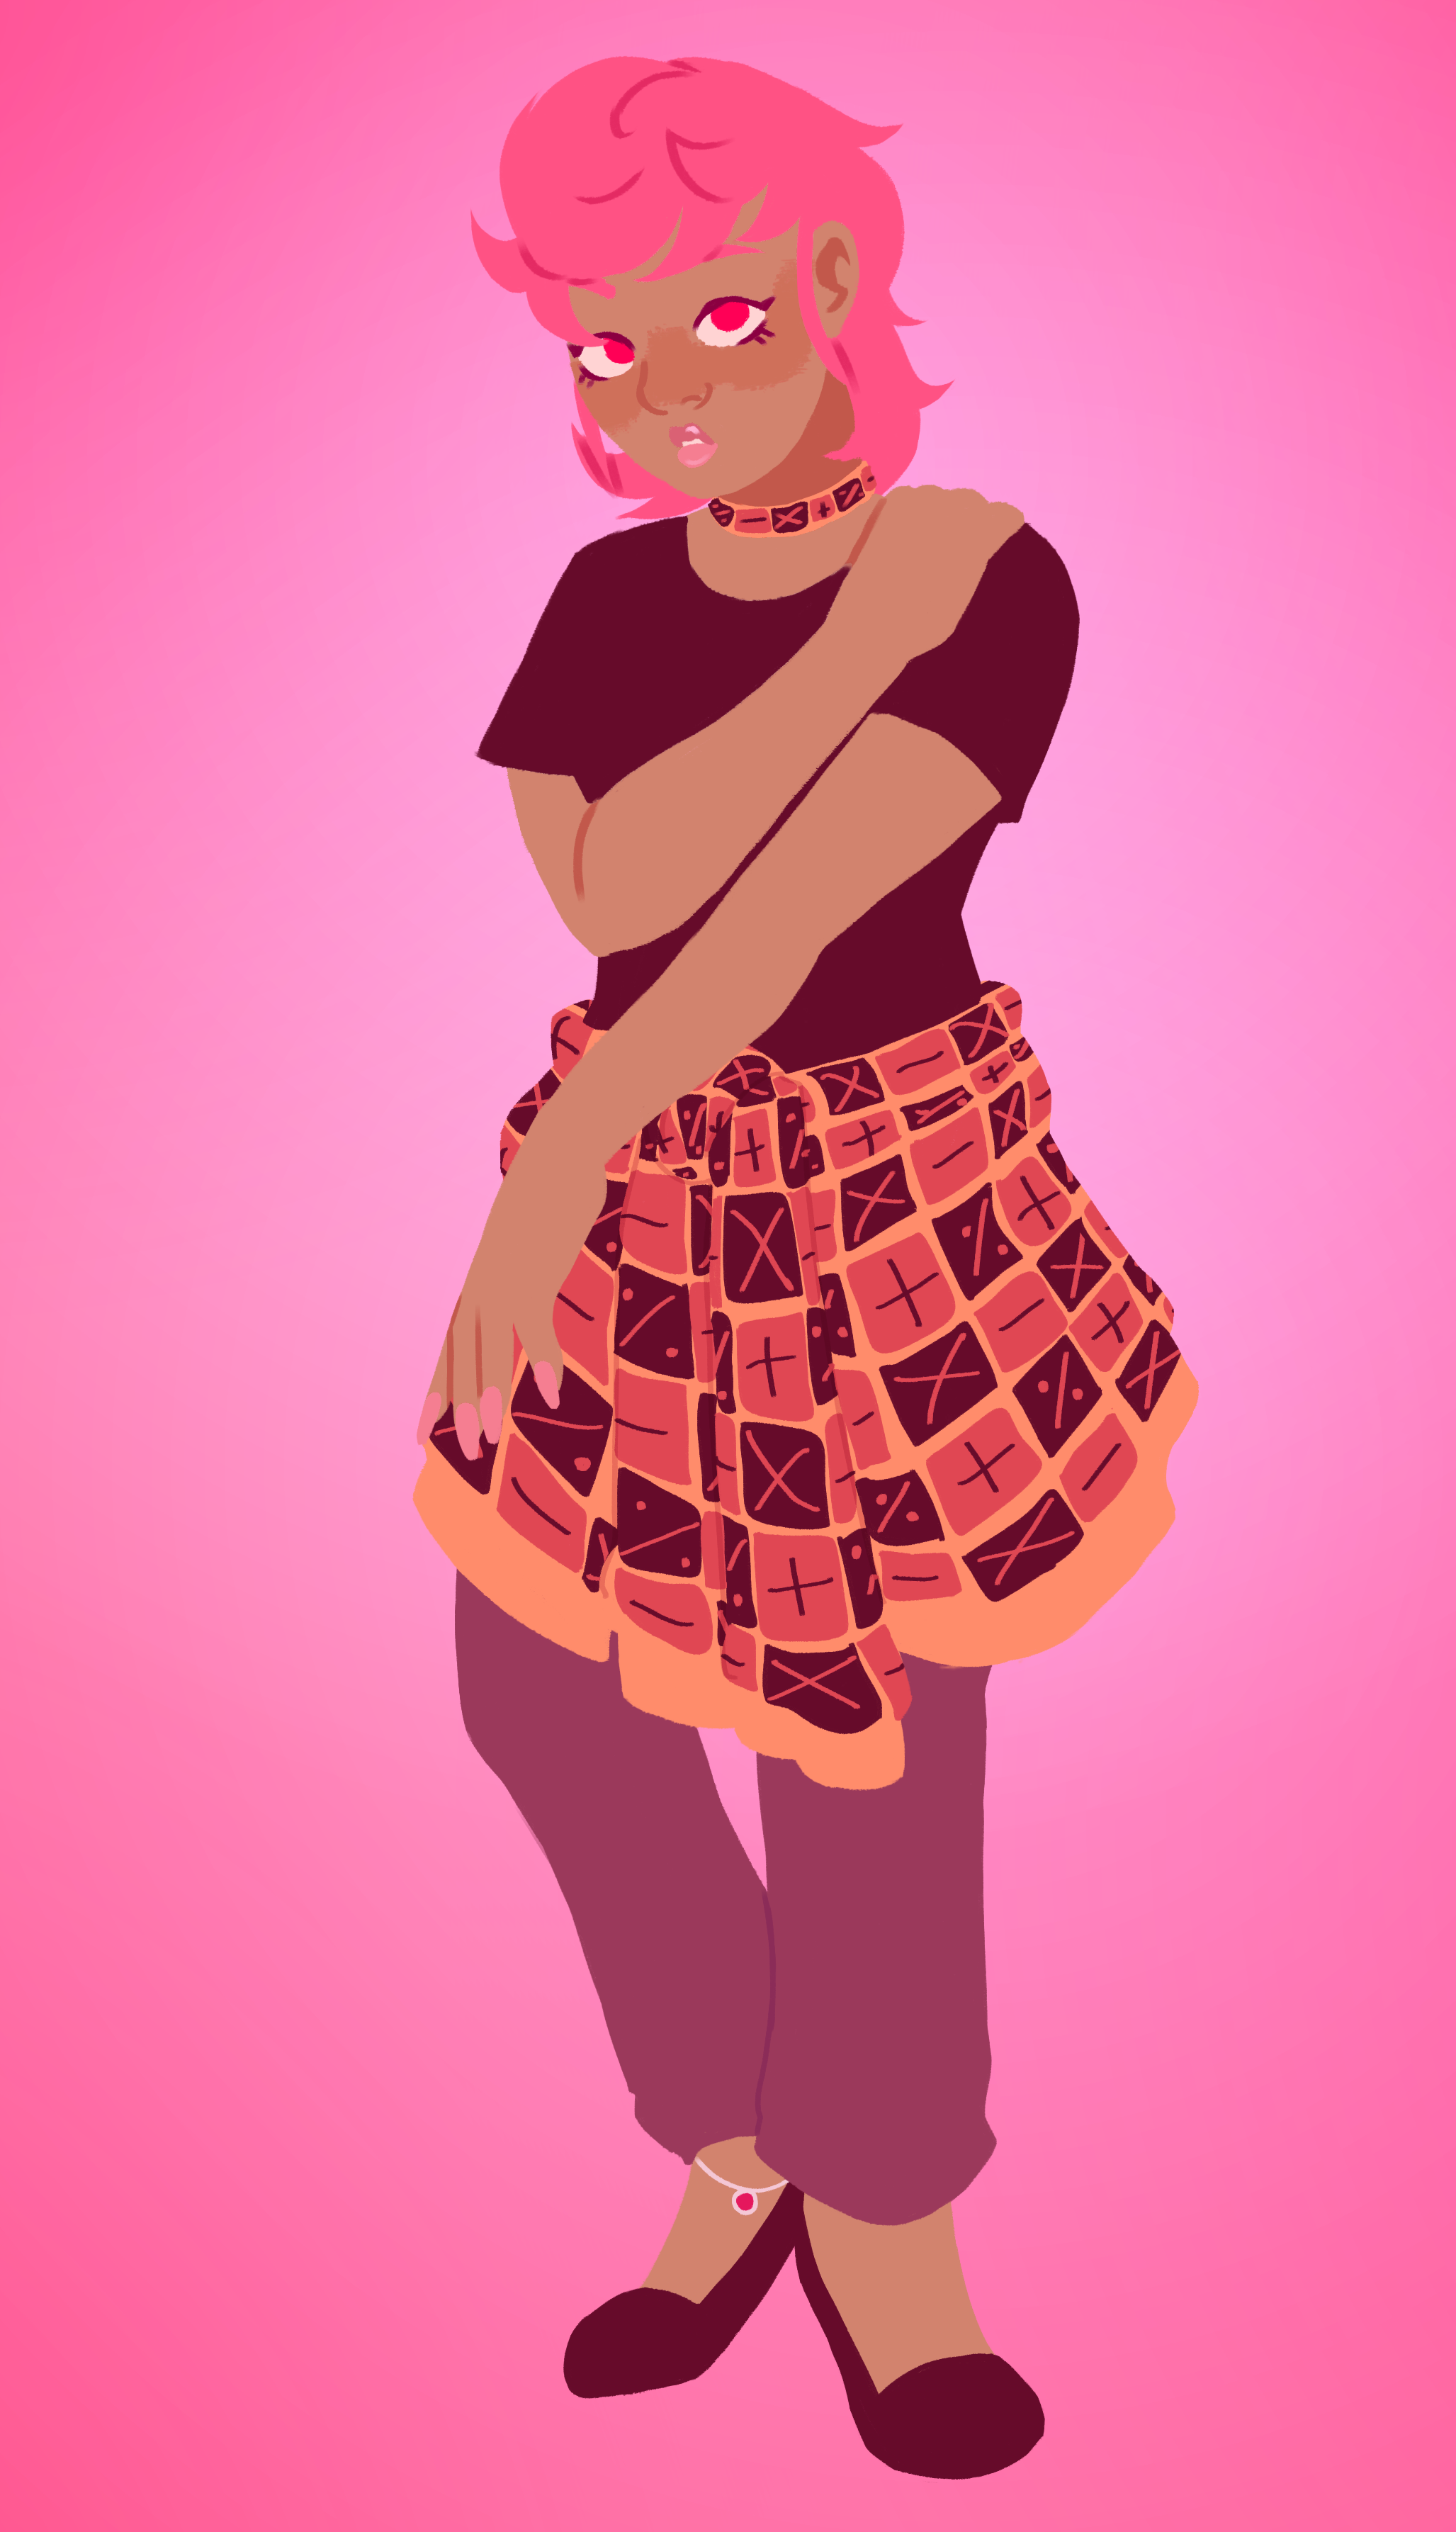 a drawing of Trish Una from Jojo's Bizarre Adventure: Golden Wind, in an alternate outfit. She has a black T-shirt, a jacket tied around her waist patterned with mathematical symbols like her canonical skirt, jeans, flats, and an anklet with a small charm.